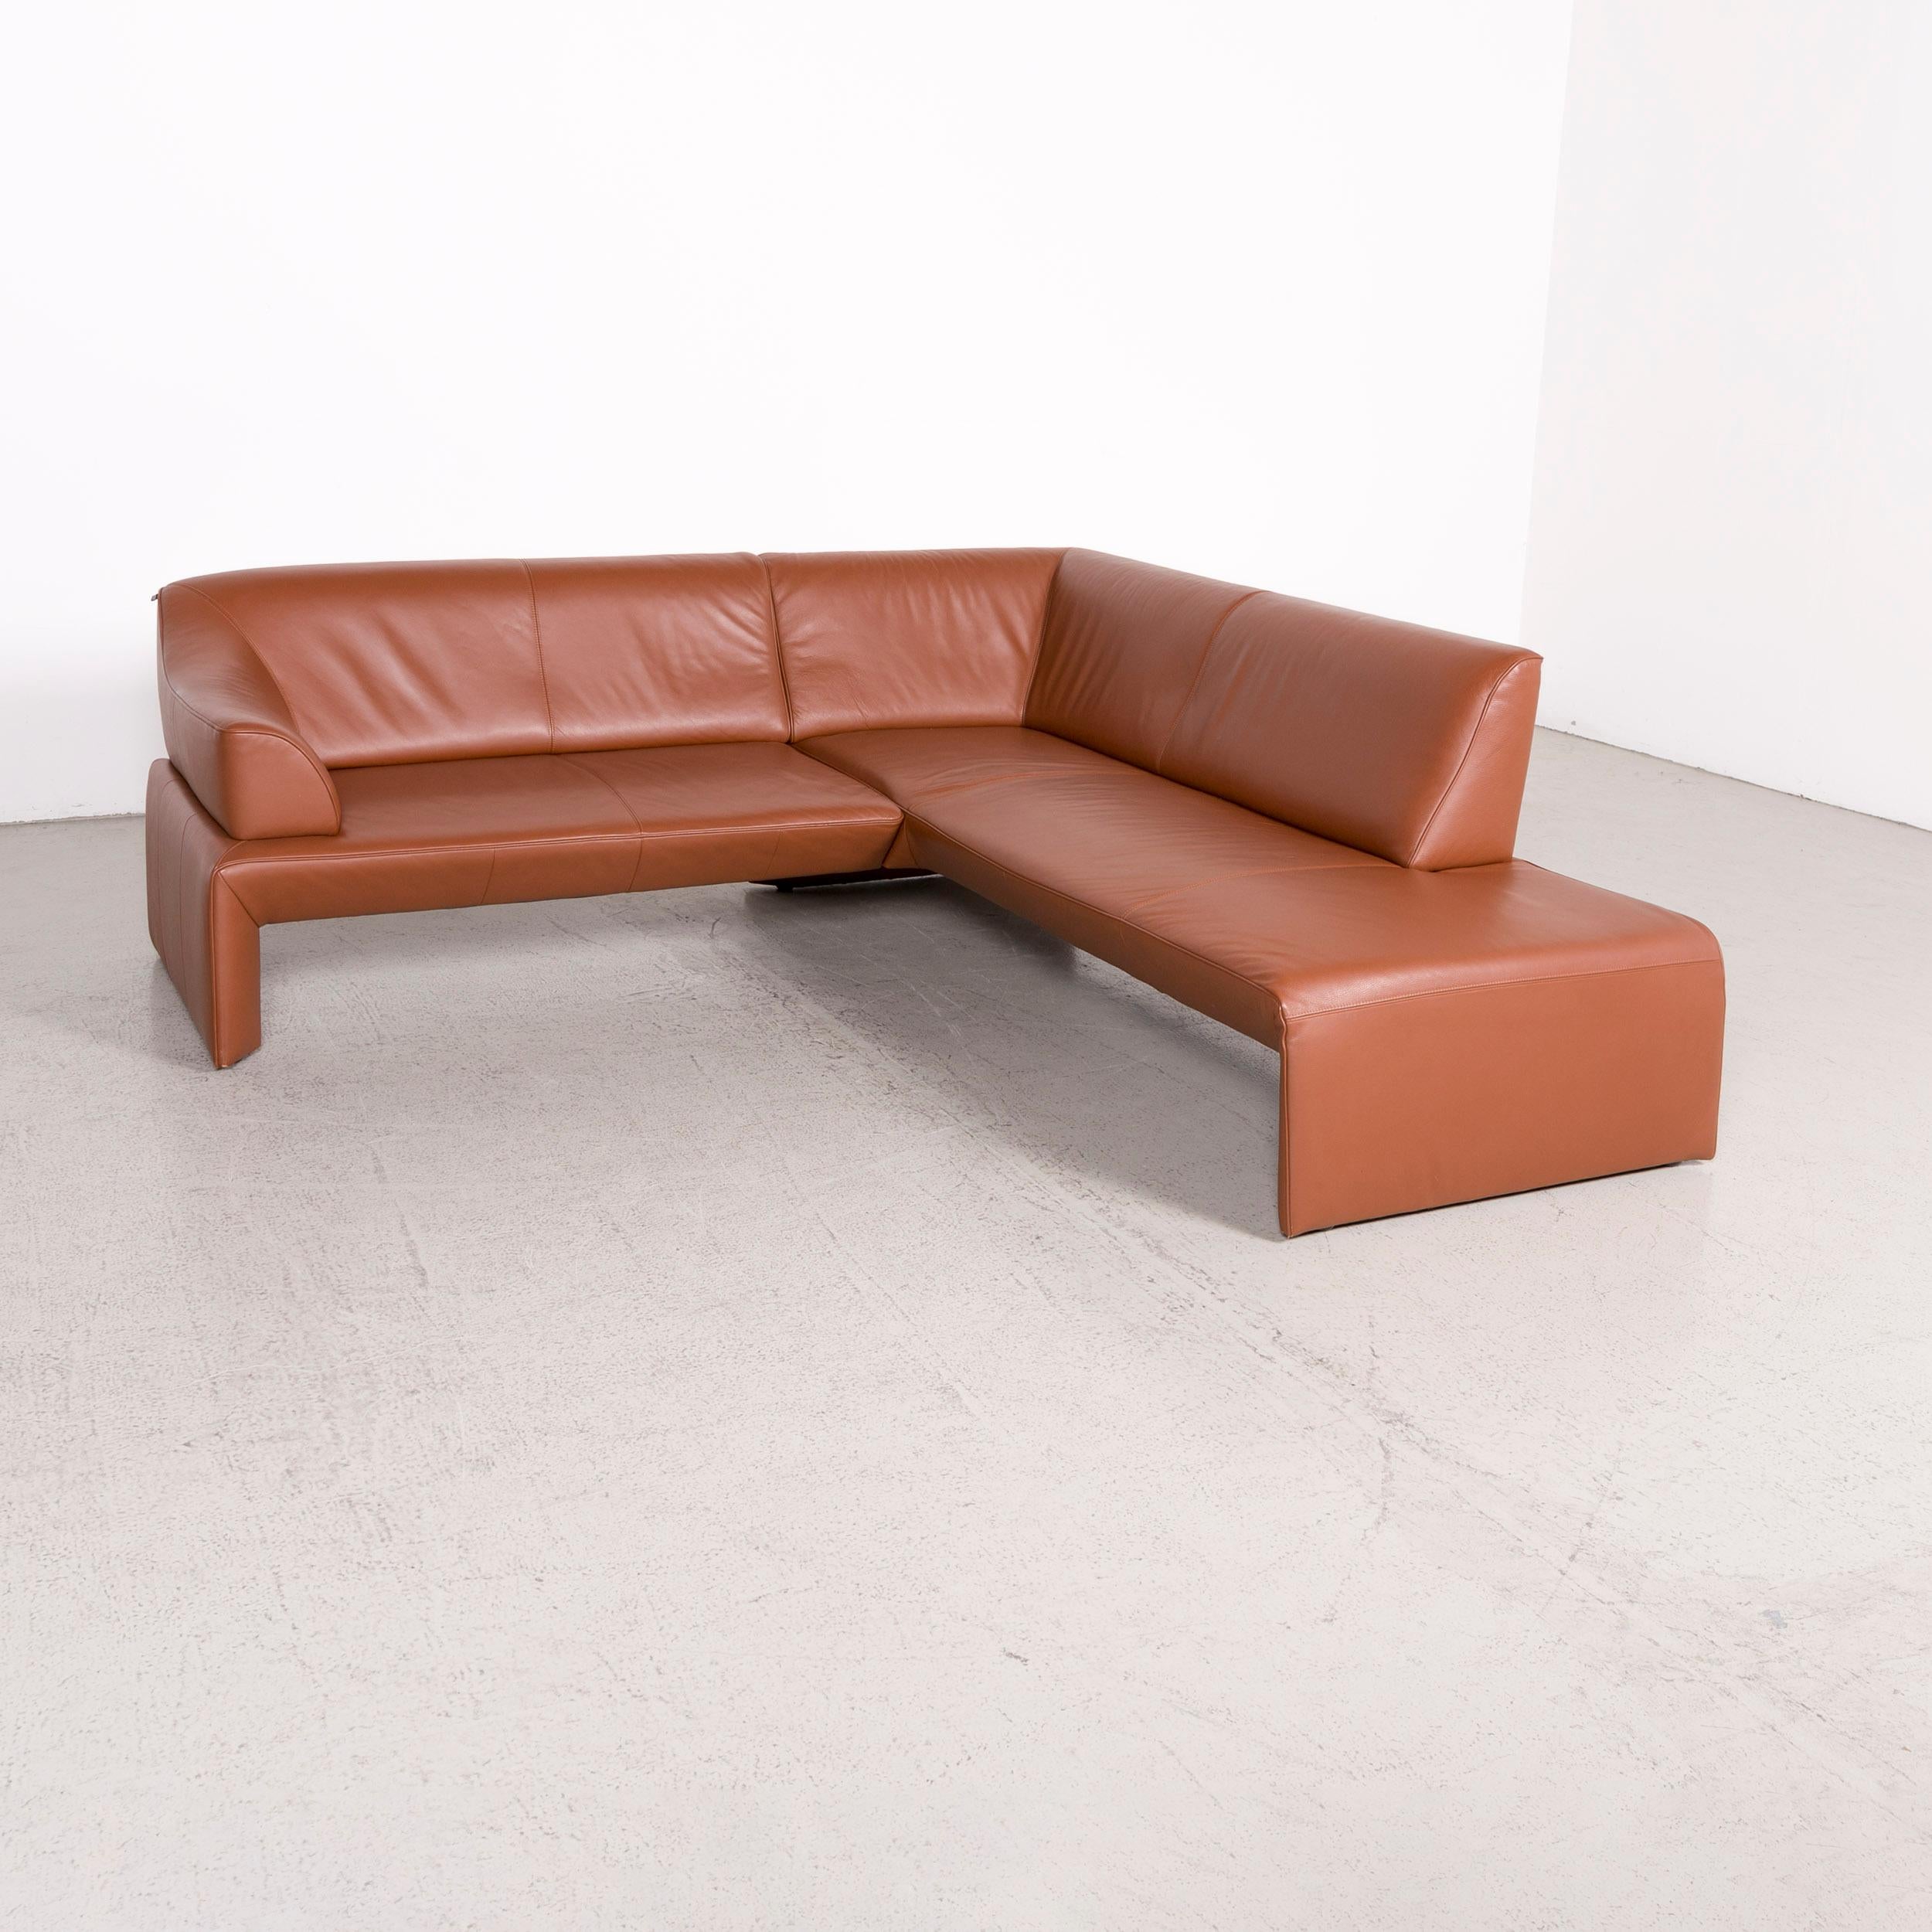 We bring to you a Laauser designer corner sofa brown cognac genuine leather sofa couch.

Product measurements in centimeters:

Depth 85
Width 215
Height 80
Seat-height 40
Rest-height 60
Seat-depth 55
Seat-width 165
Back-height 40.
 